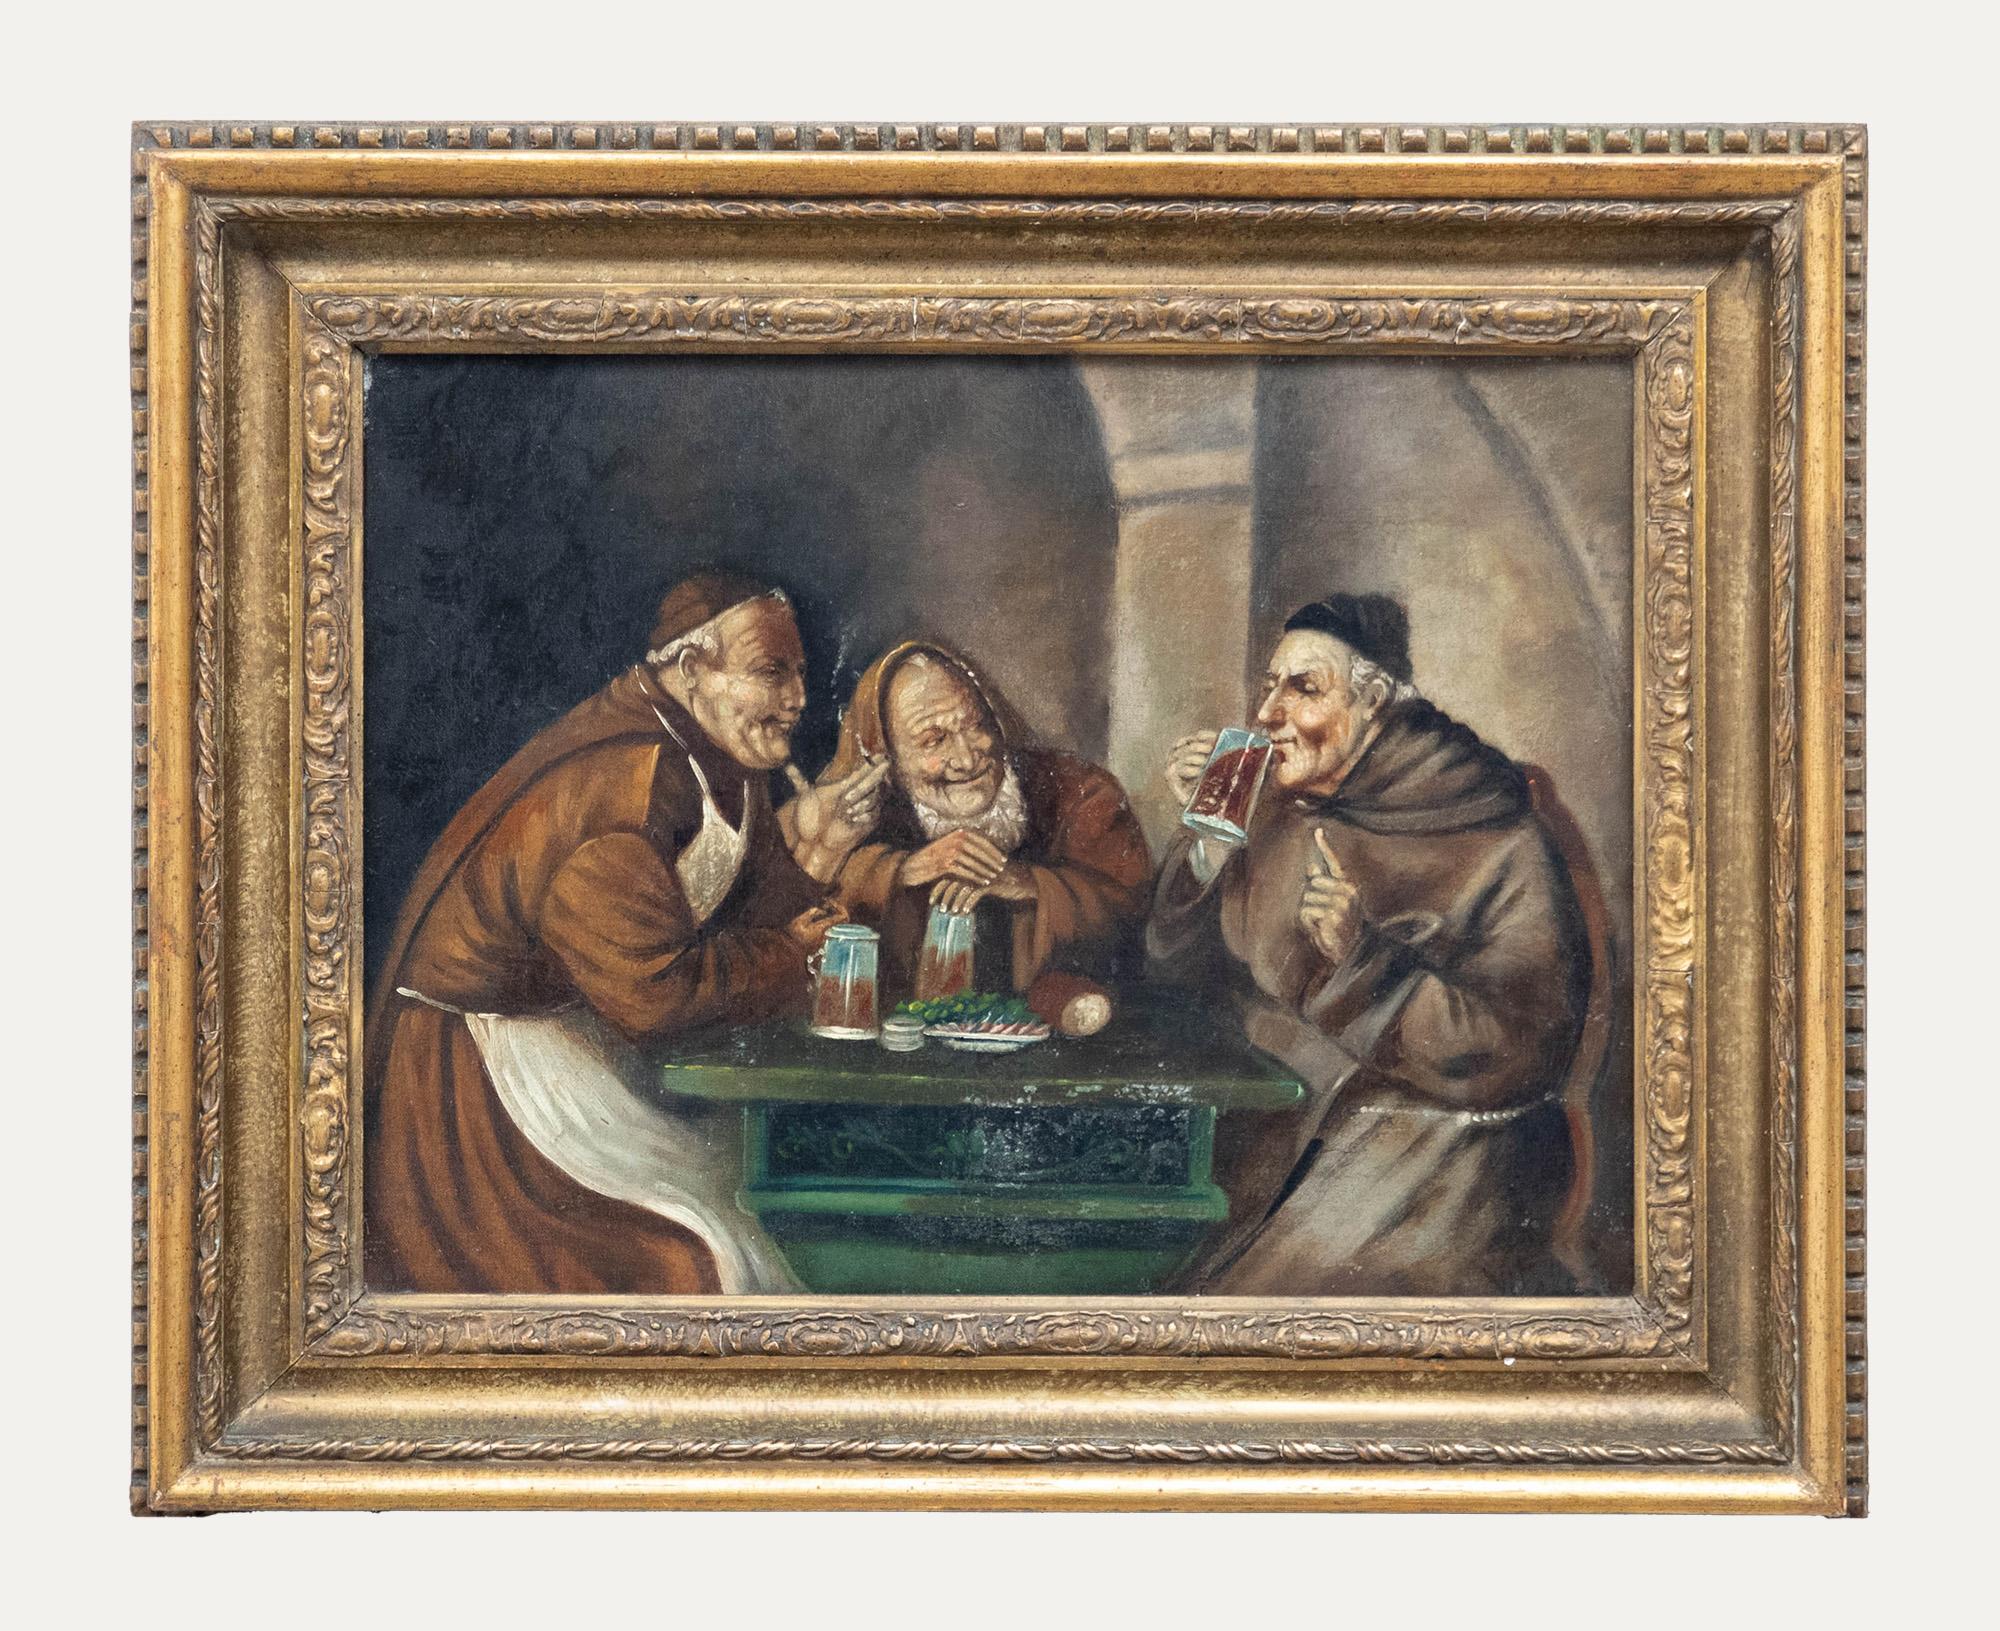 Unknown Figurative Painting - Ferruccio Vitale (1875-1933) - Framed Early 20th Century Oil, Merry Monks